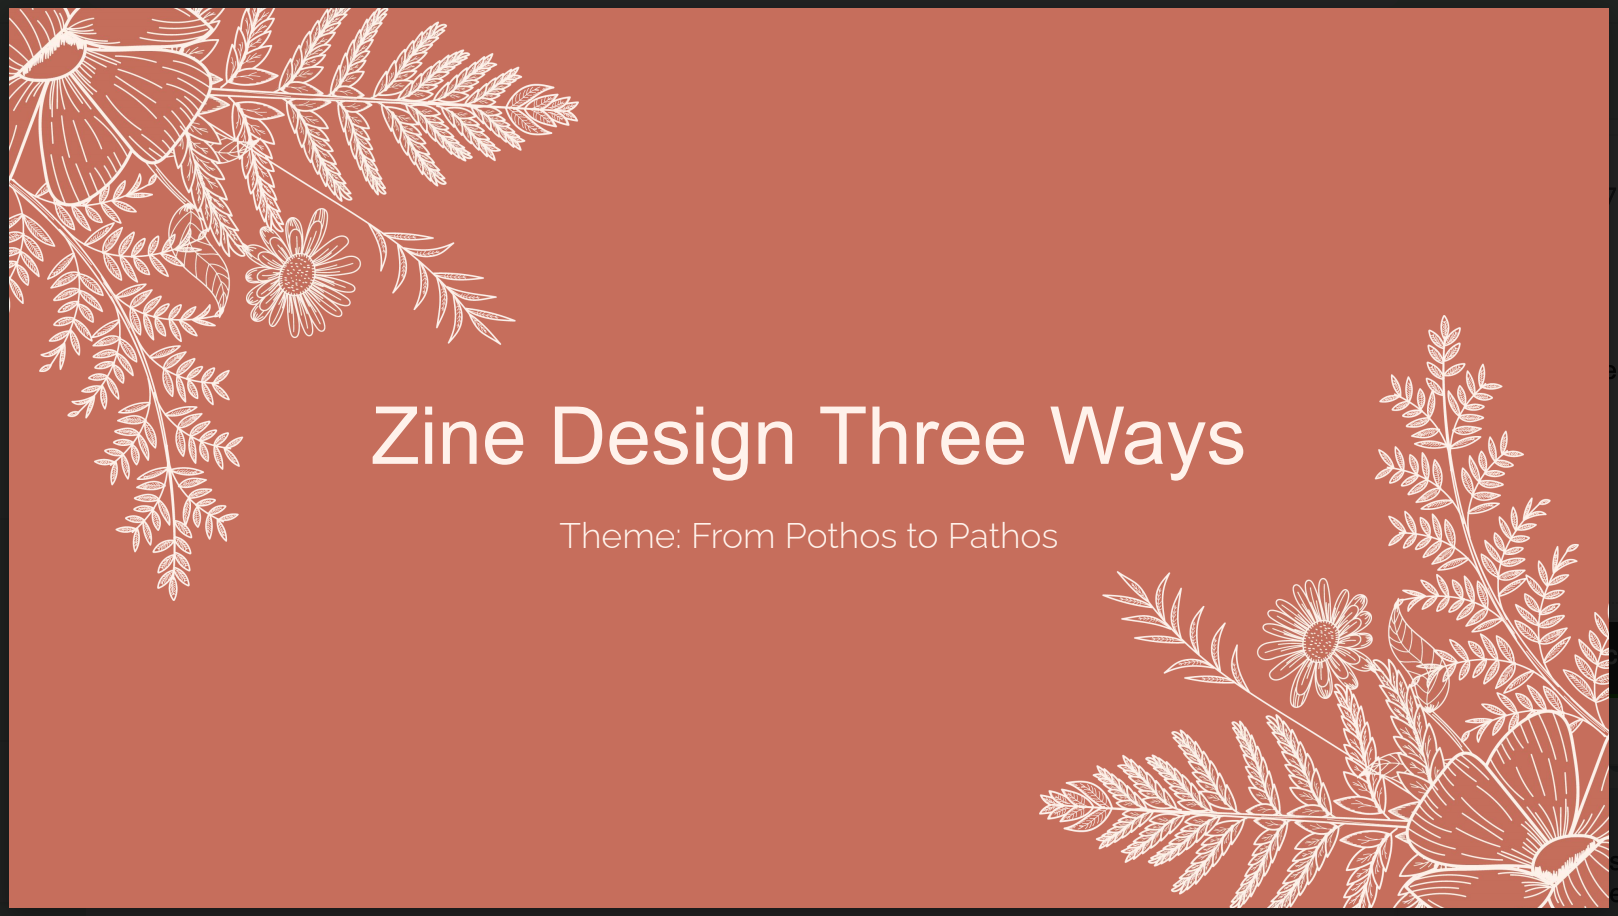 presentation cover slide with the title, "Zine Design Three Ways: From Pothos to Pathos" on a vodka penne colored background with off white ferny leaves in the top left and bottom right corners